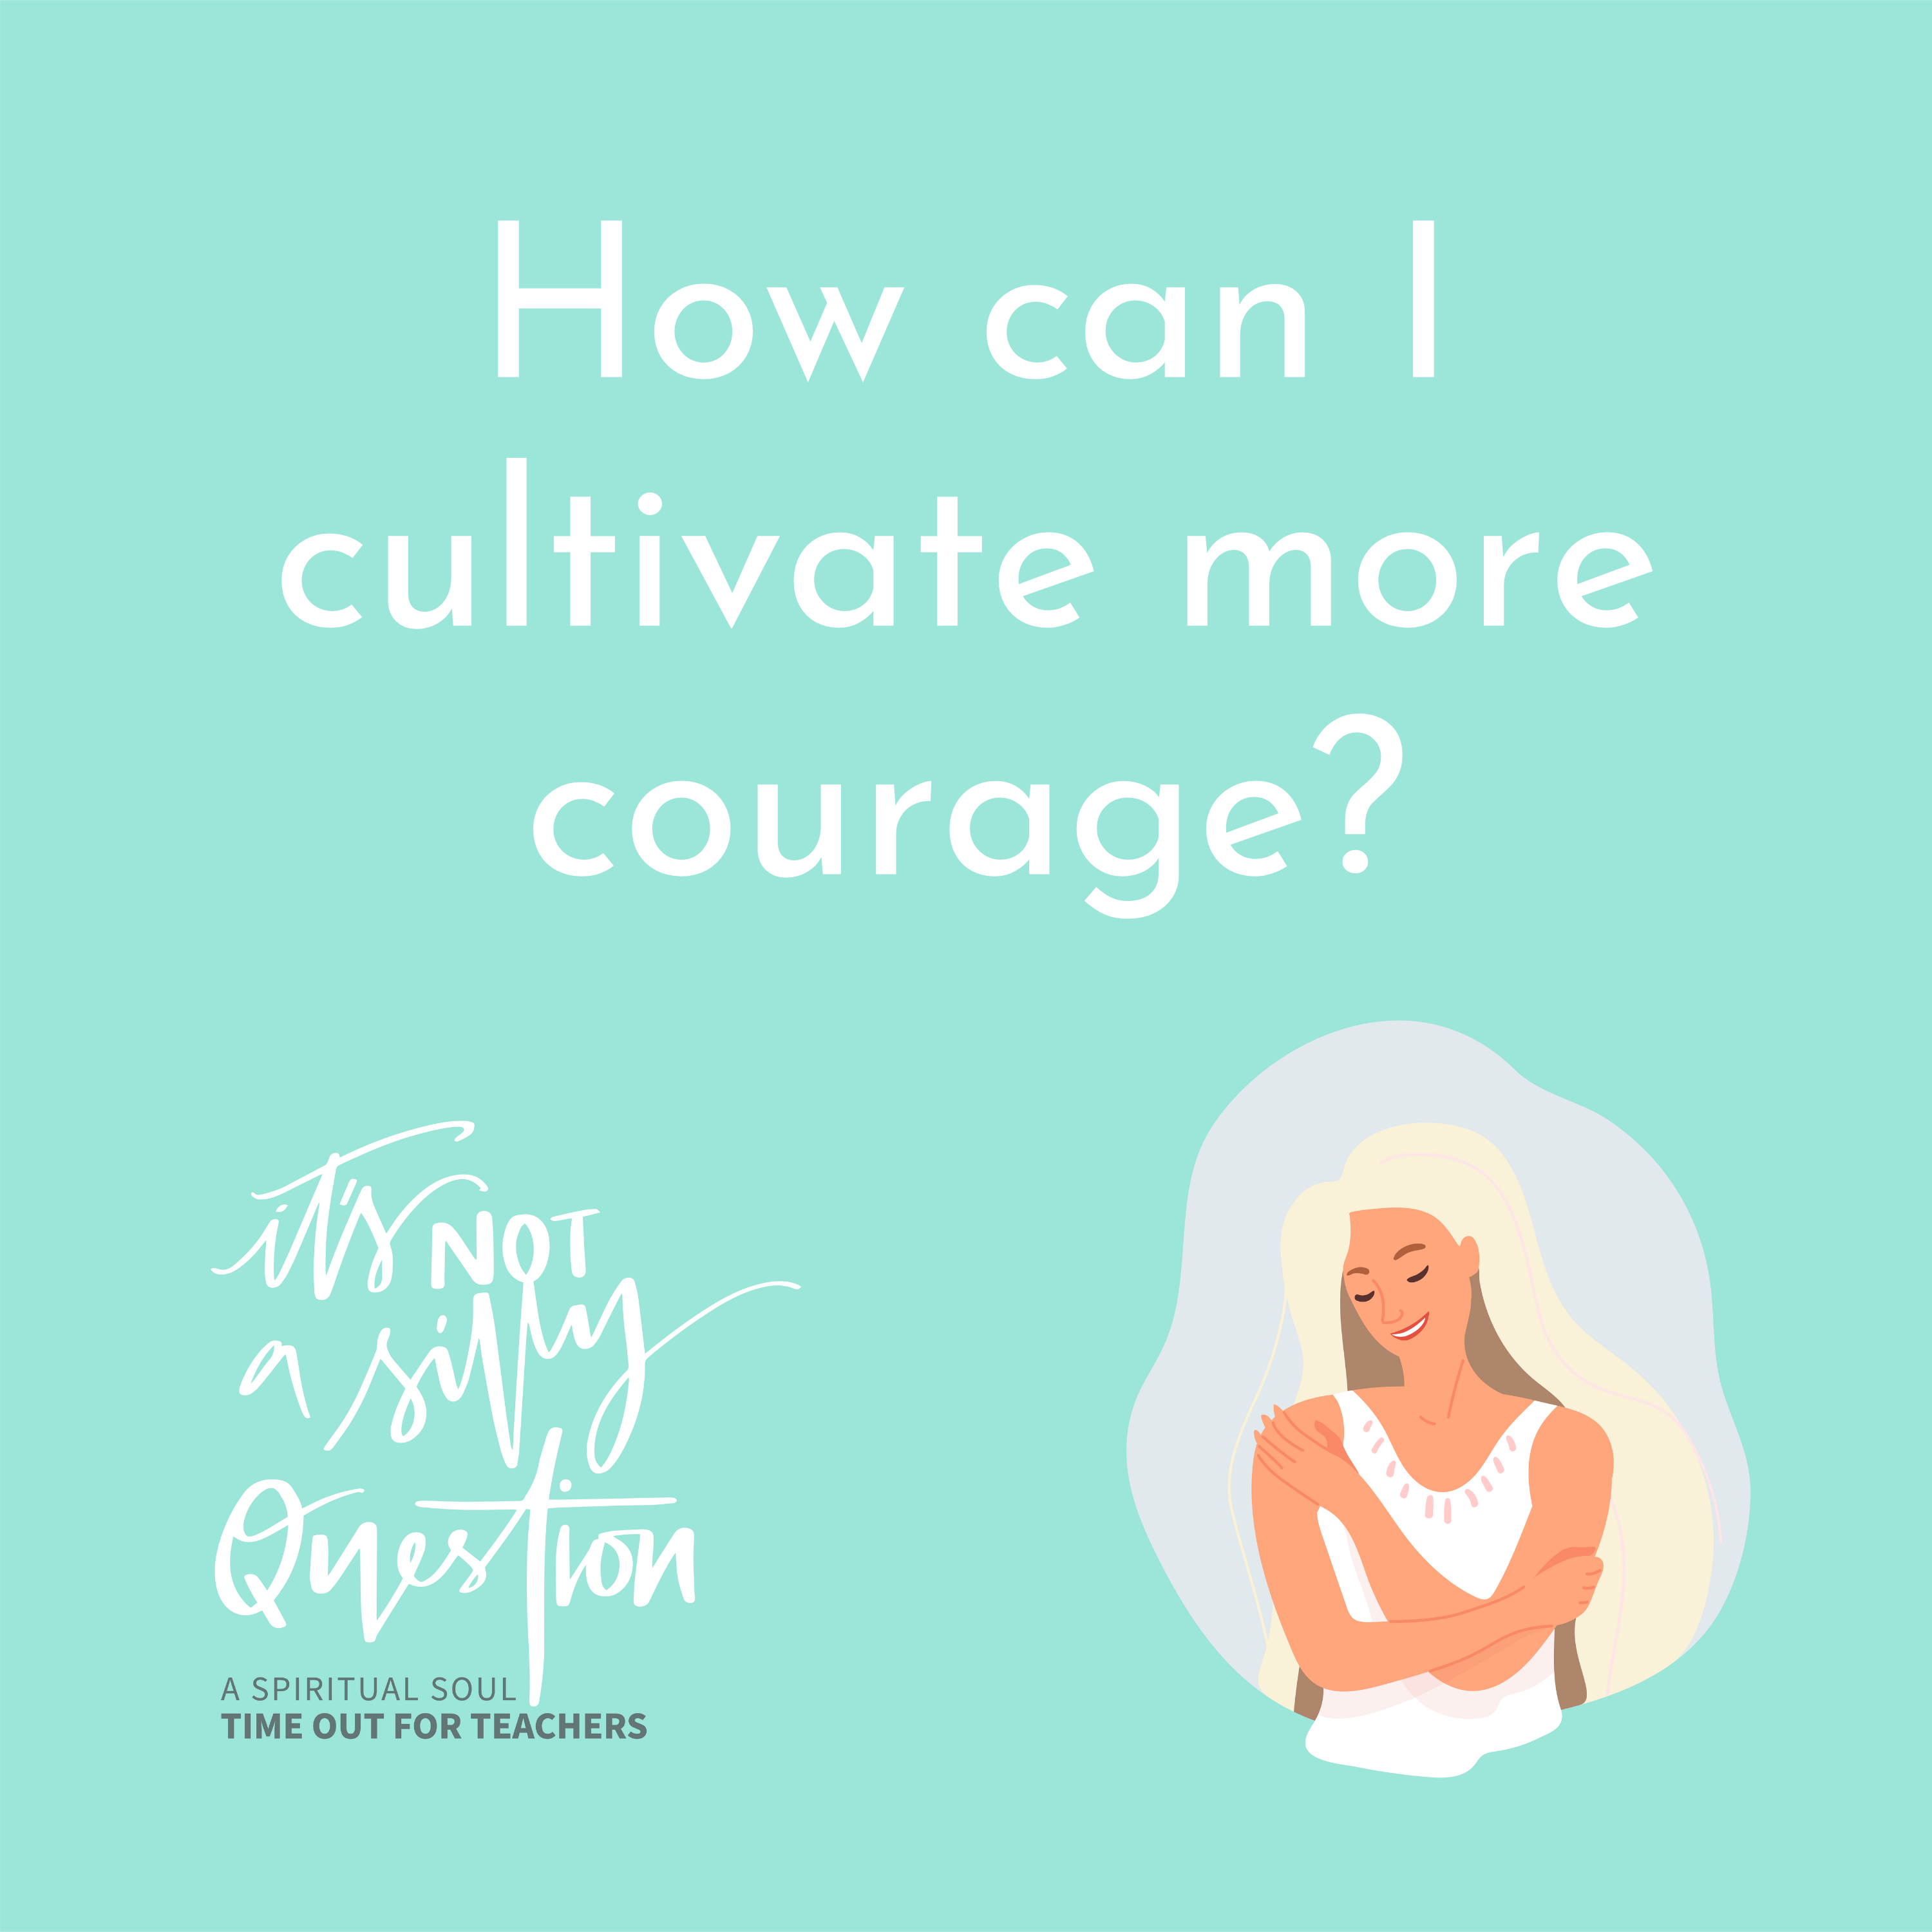 How can I cultivate more courage?